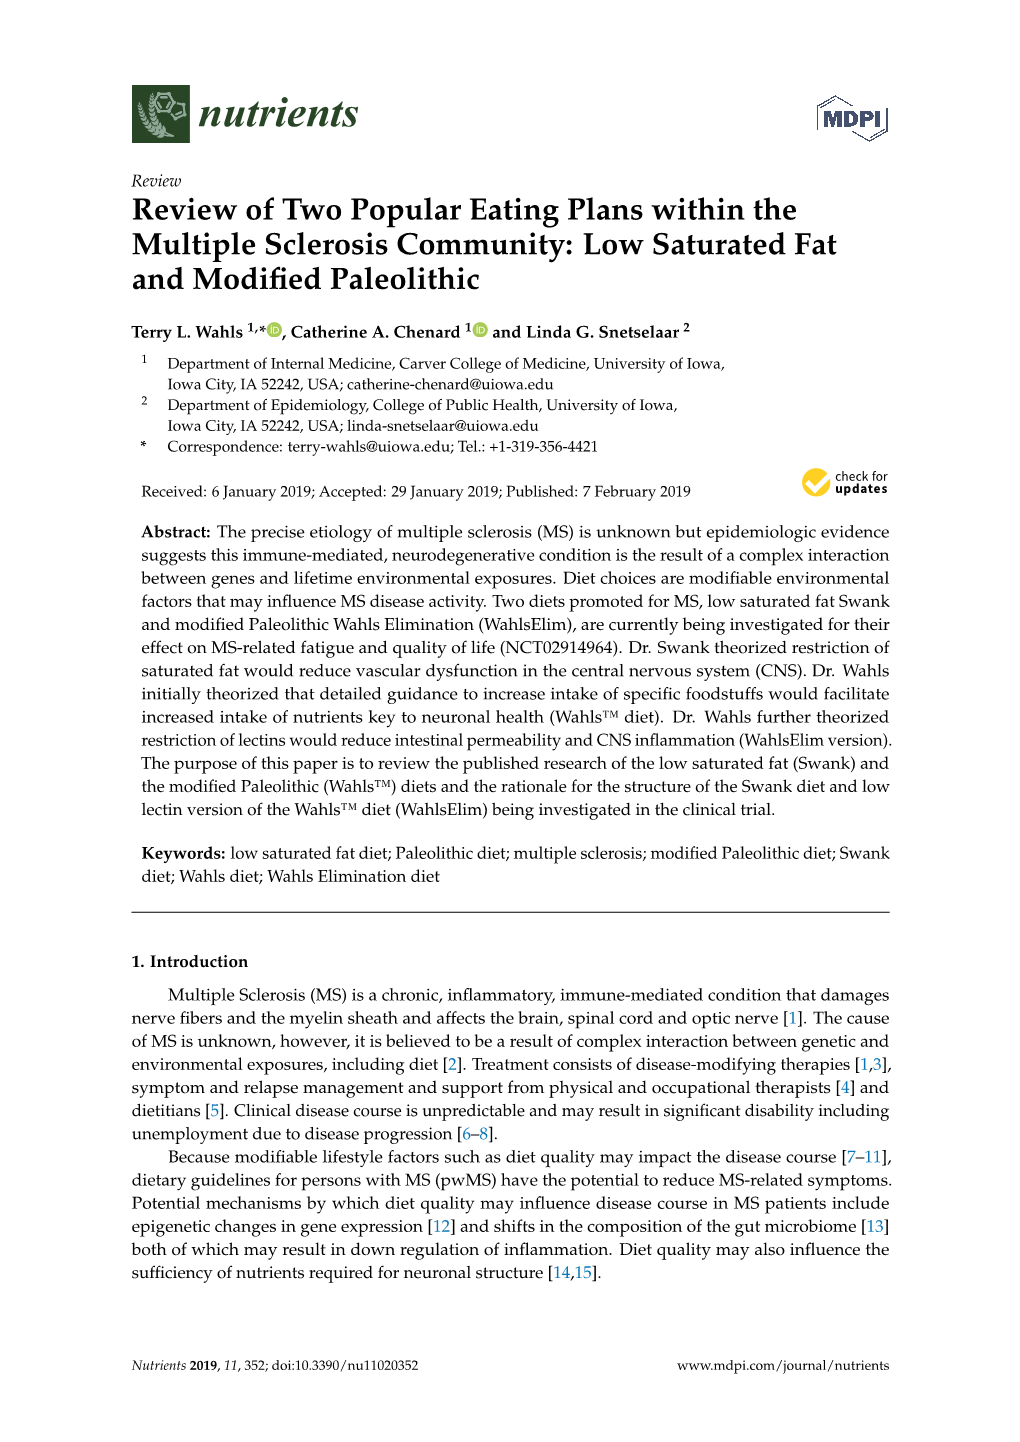 Review of Two Popular Eating Plans Within the Multiple Sclerosis Community: Low Saturated Fat and Modified Paleolithic